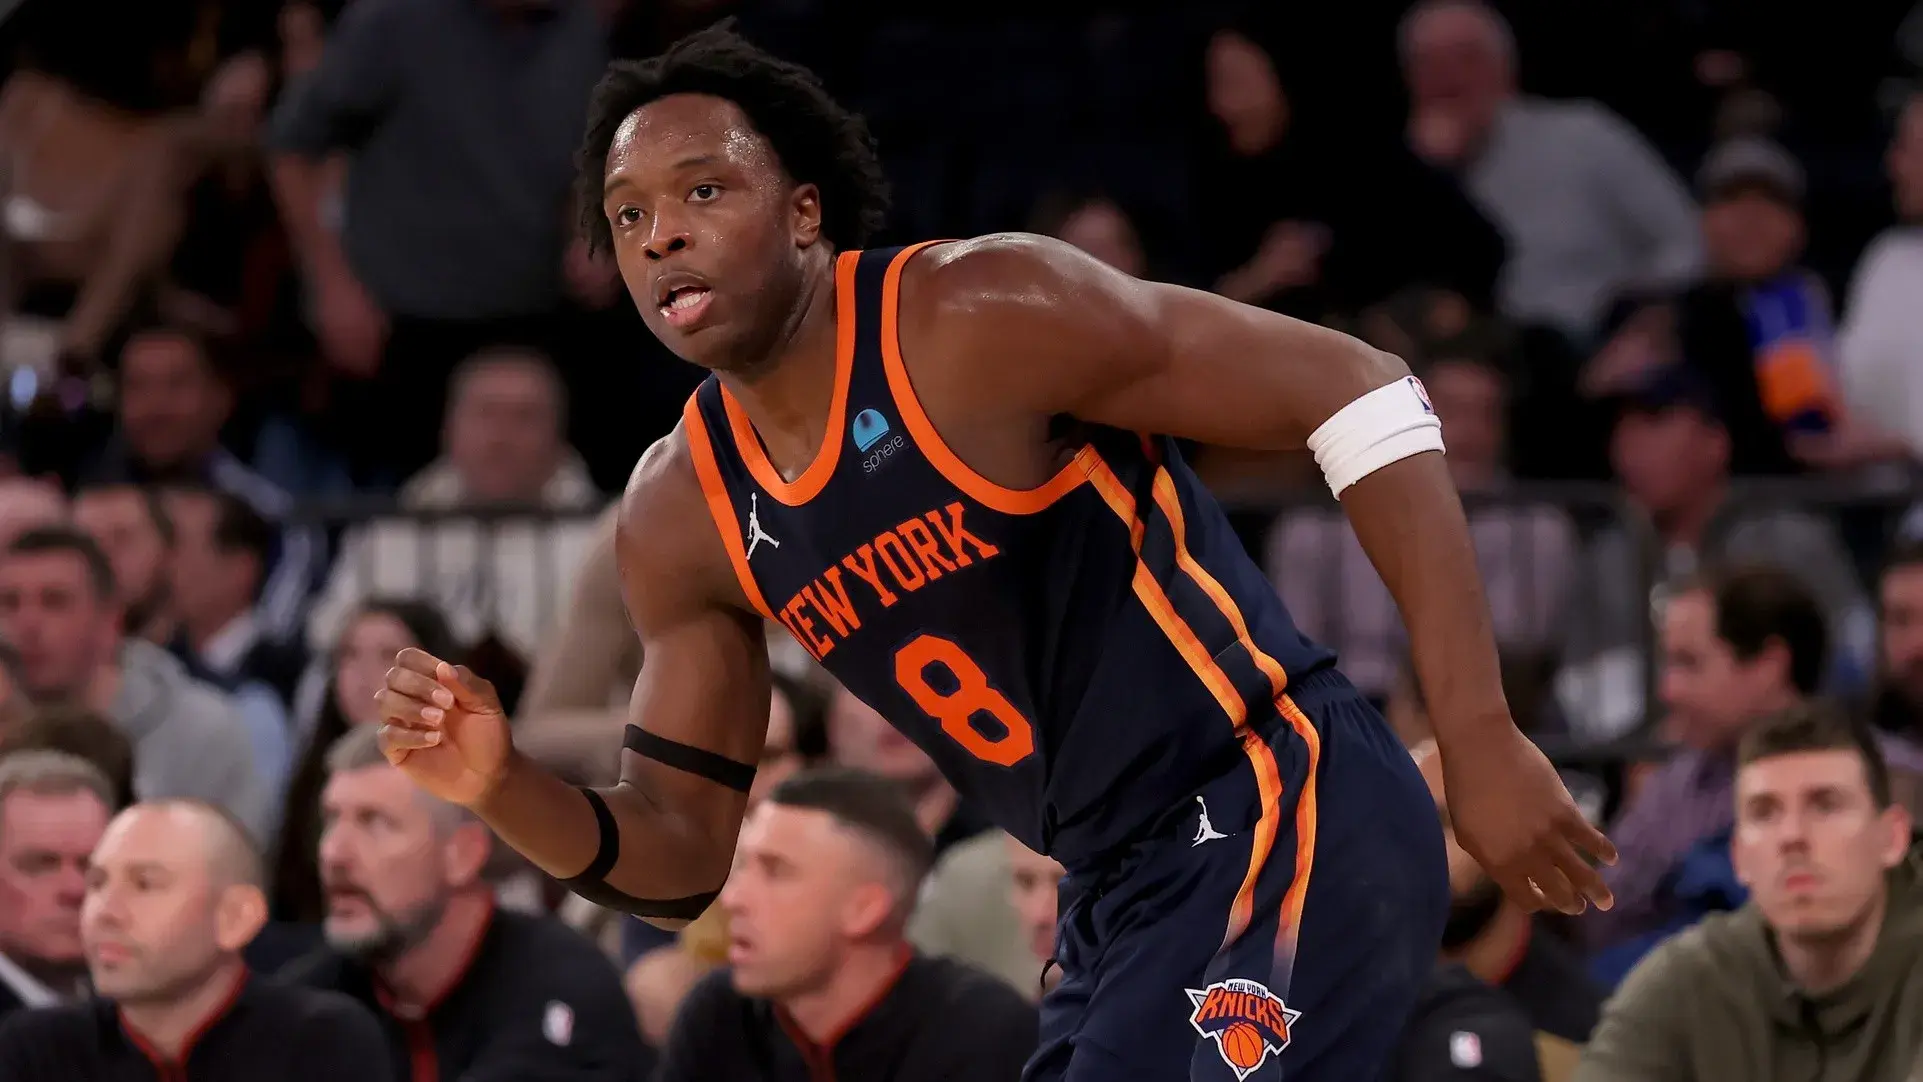 New York Knicks forward OG Anunoby (8) during the third quarter against the Denver Nuggets at Madison Square Garden. / Brad Penner-USA TODAY Sports